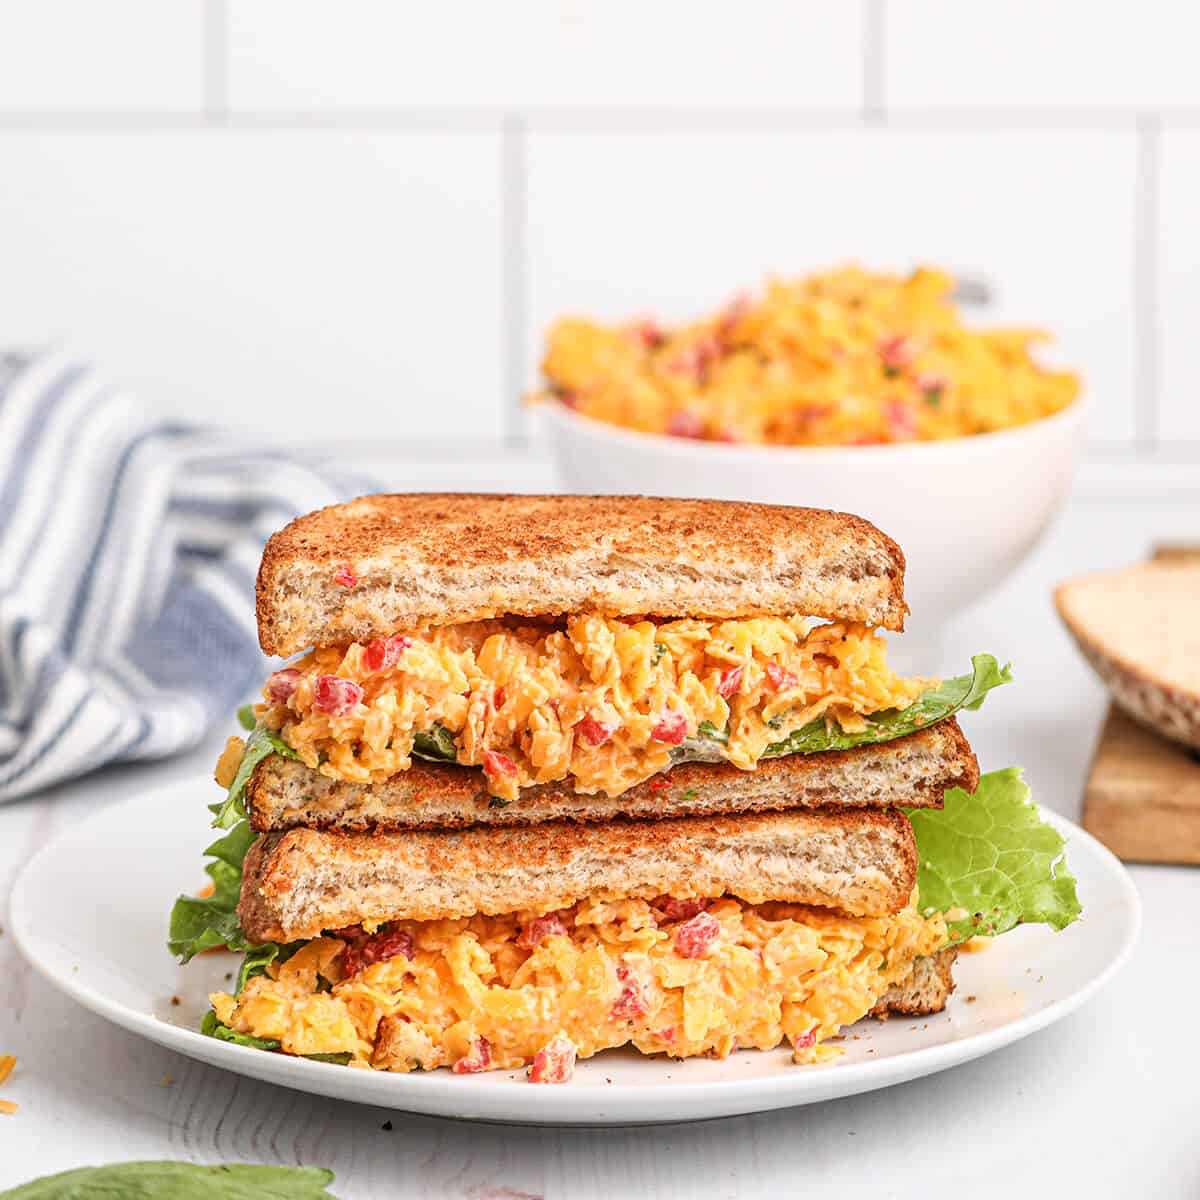 Pimiento Cheese sandwich on a white serving plate.